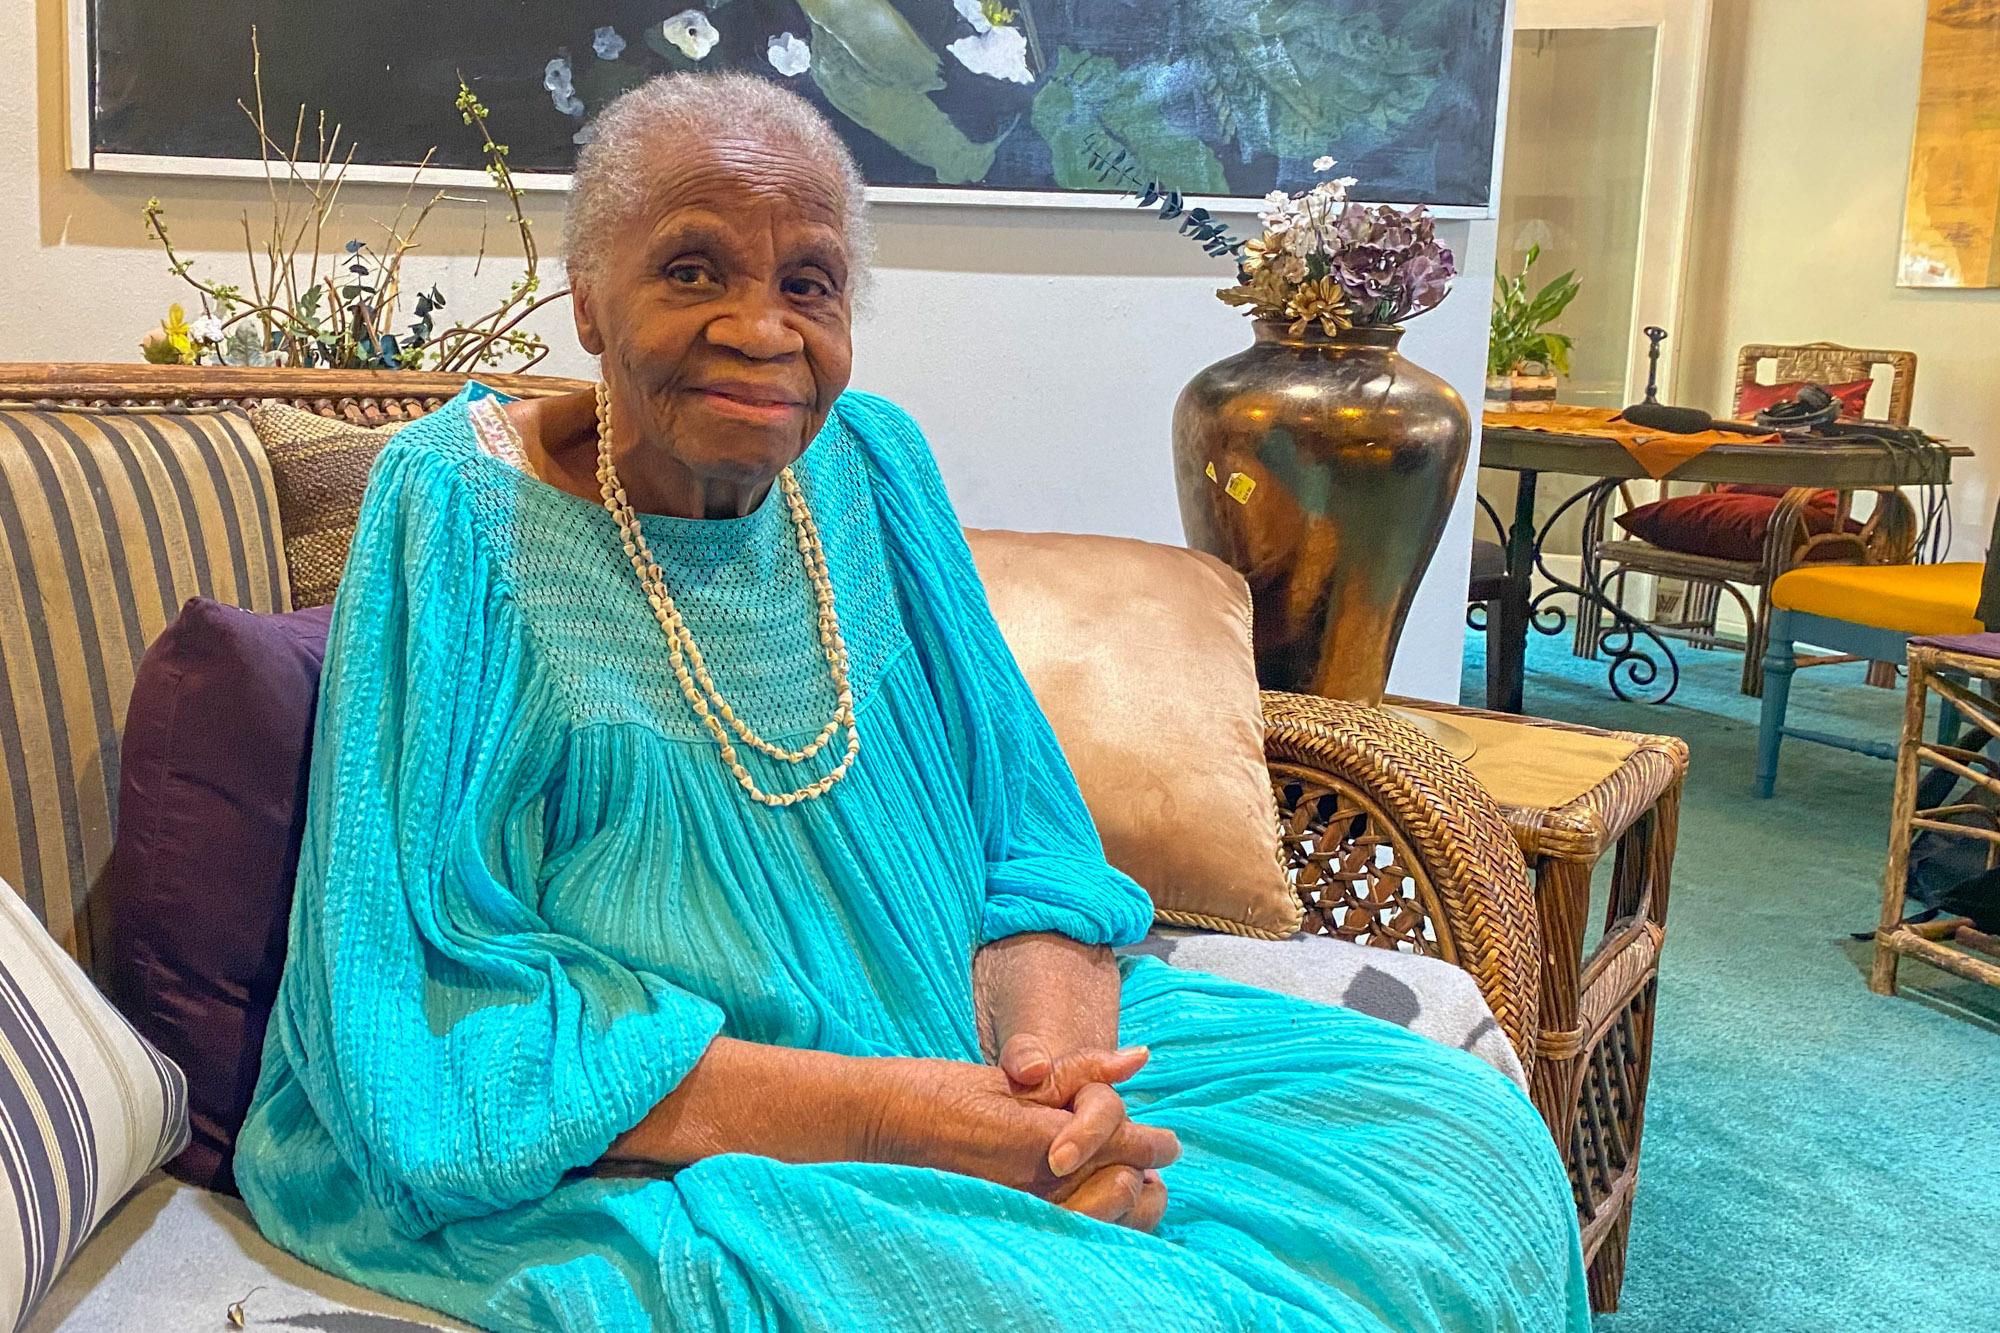 Historian Gwen Scott, pictured here at her Denver home, is the author of a book called "Blacks Through the 'Ayes' of Our American Presidents," from several years ago.